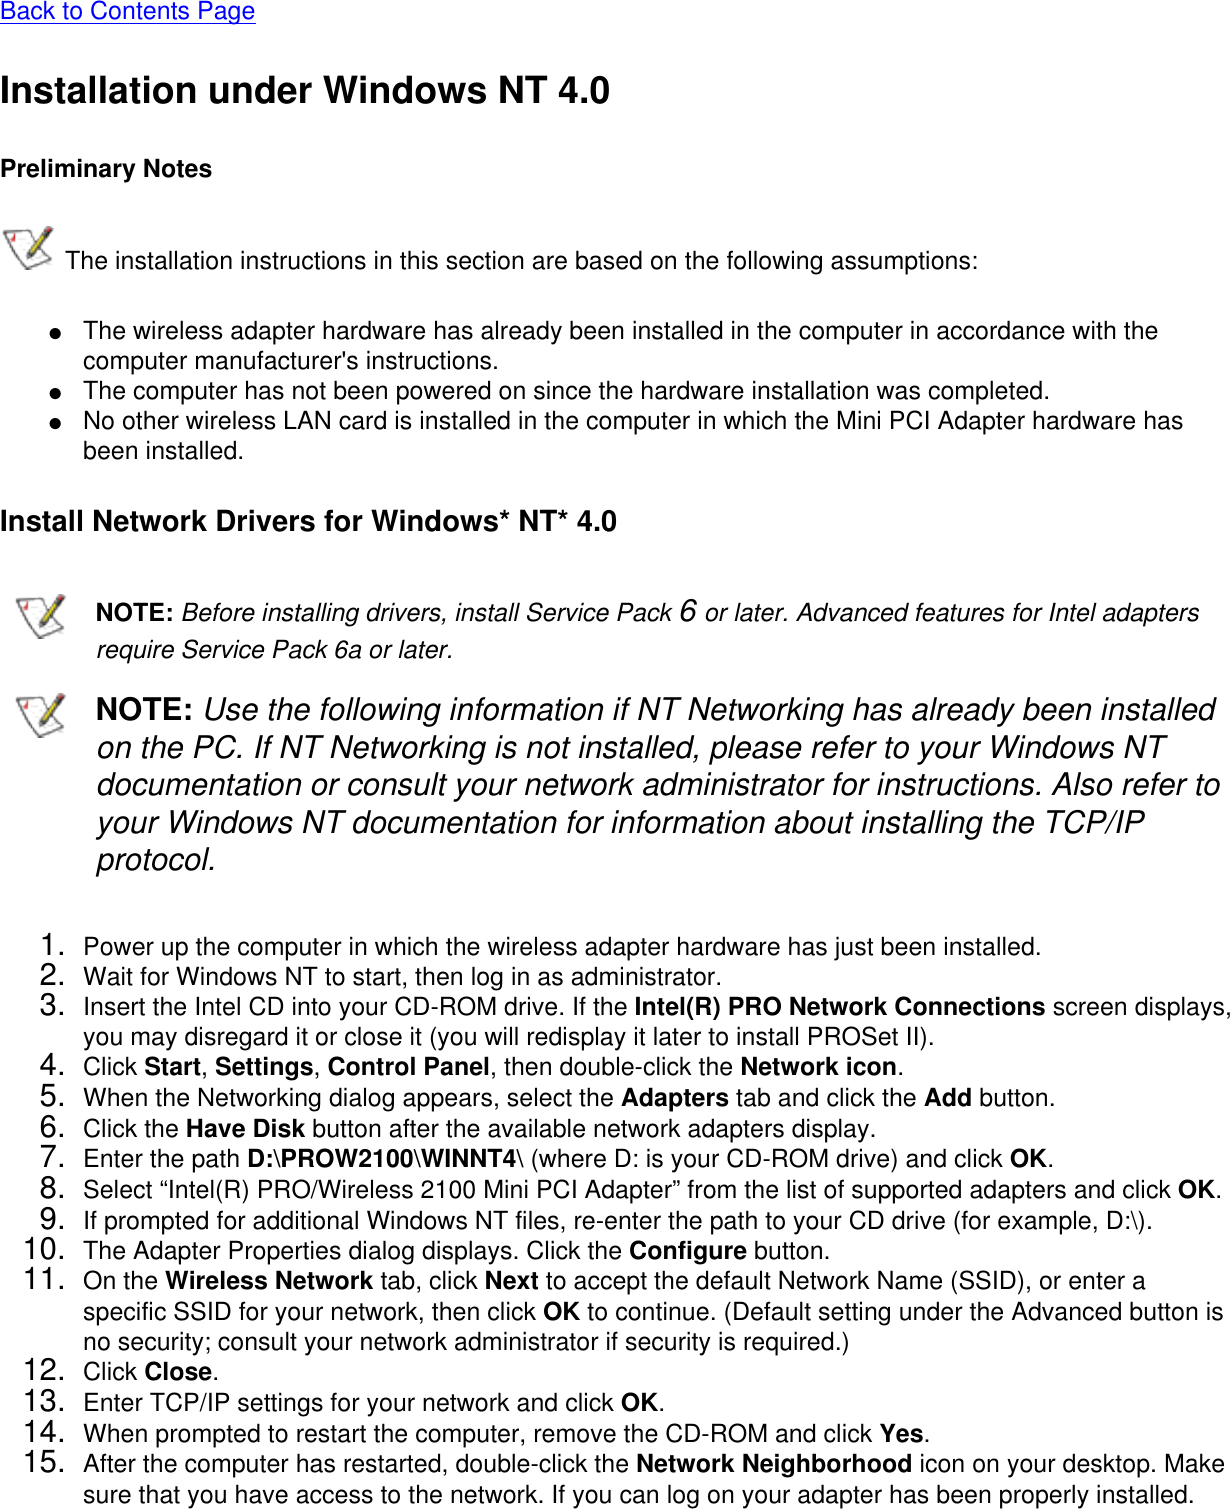 Back to Contents PageInstallation under Windows NT 4.0Preliminary Notes The installation instructions in this section are based on the following assumptions:●     The wireless adapter hardware has already been installed in the computer in accordance with the computer manufacturer&apos;s instructions.●     The computer has not been powered on since the hardware installation was completed.●     No other wireless LAN card is installed in the computer in which the Mini PCI Adapter hardware has been installed.Install Network Drivers for Windows* NT* 4.0NOTE: Before installing drivers, install Service Pack 6 or later. Advanced features for Intel adapters require Service Pack 6a or later. NOTE: Use the following information if NT Networking has already been installed on the PC. If NT Networking is not installed, please refer to your Windows NT documentation or consult your network administrator for instructions. Also refer to your Windows NT documentation for information about installing the TCP/IP protocol.1.  Power up the computer in which the wireless adapter hardware has just been installed.2.  Wait for Windows NT to start, then log in as administrator.3.  Insert the Intel CD into your CD-ROM drive. If the Intel(R) PRO Network Connections screen displays, you may disregard it or close it (you will redisplay it later to install PROSet II).4.  Click Start, Settings, Control Panel, then double-click the Network icon.5.  When the Networking dialog appears, select the Adapters tab and click the Add button.6.  Click the Have Disk button after the available network adapters display.7.  Enter the path D:\PROW2100\WINNT4\ (where D: is your CD-ROM drive) and click OK.8.  Select “Intel(R) PRO/Wireless 2100 Mini PCI Adapter” from the list of supported adapters and click OK.9.  If prompted for additional Windows NT files, re-enter the path to your CD drive (for example, D:\).10.  The Adapter Properties dialog displays. Click the Configure button.11.  On the Wireless Network tab, click Next to accept the default Network Name (SSID), or enter a specific SSID for your network, then click OK to continue. (Default setting under the Advanced button is no security; consult your network administrator if security is required.) 12.  Click Close.13.  Enter TCP/IP settings for your network and click OK.14.  When prompted to restart the computer, remove the CD-ROM and click Yes.15.  After the computer has restarted, double-click the Network Neighborhood icon on your desktop. Make sure that you have access to the network. If you can log on your adapter has been properly installed.